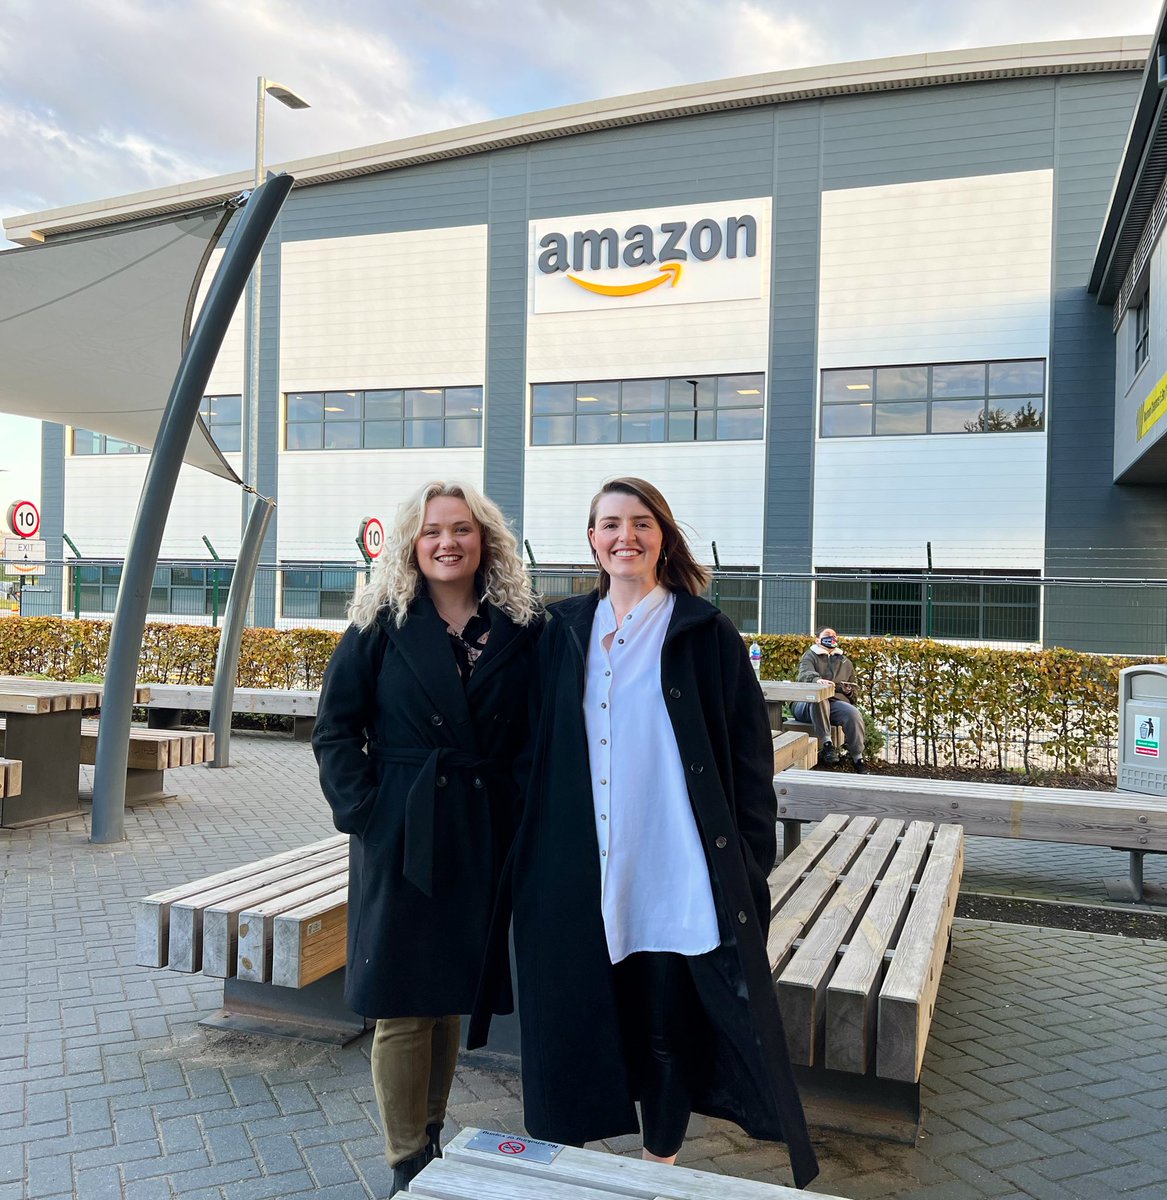 We had a brilliant day yesterday at @AmazonNewsUK in Coventry. It was great to catch up with the team and plan some of the exciting things coming in 2023 📦